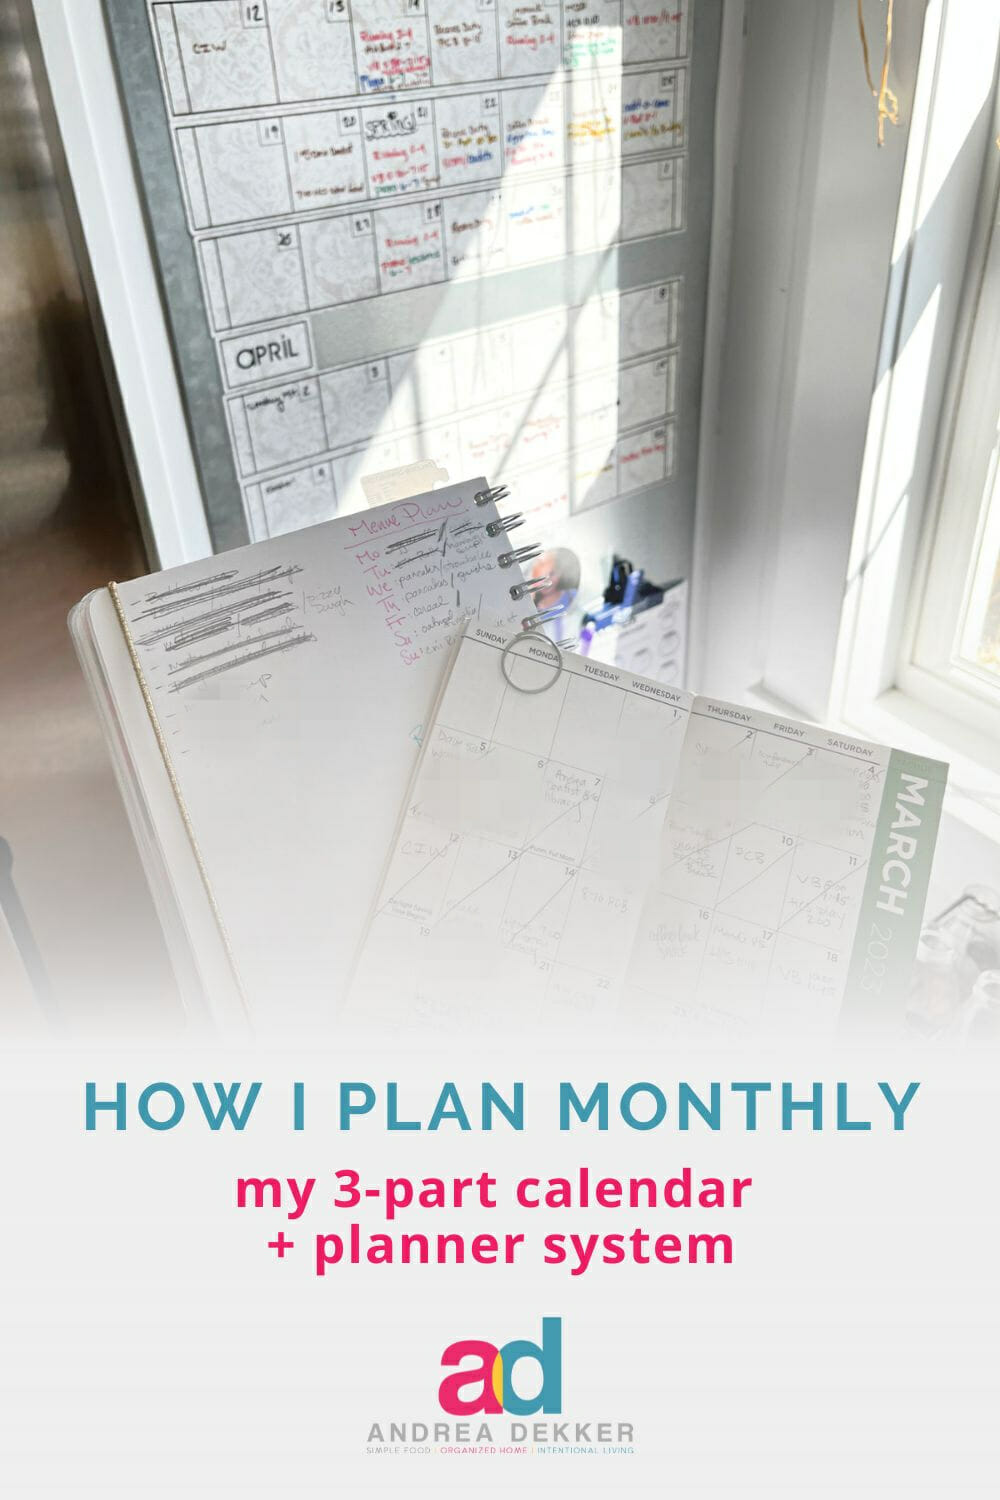 If you feel frustrated with your current planning/scheduling method, or if you're curious about a new way, give monthly planning a try! via @andreadekker